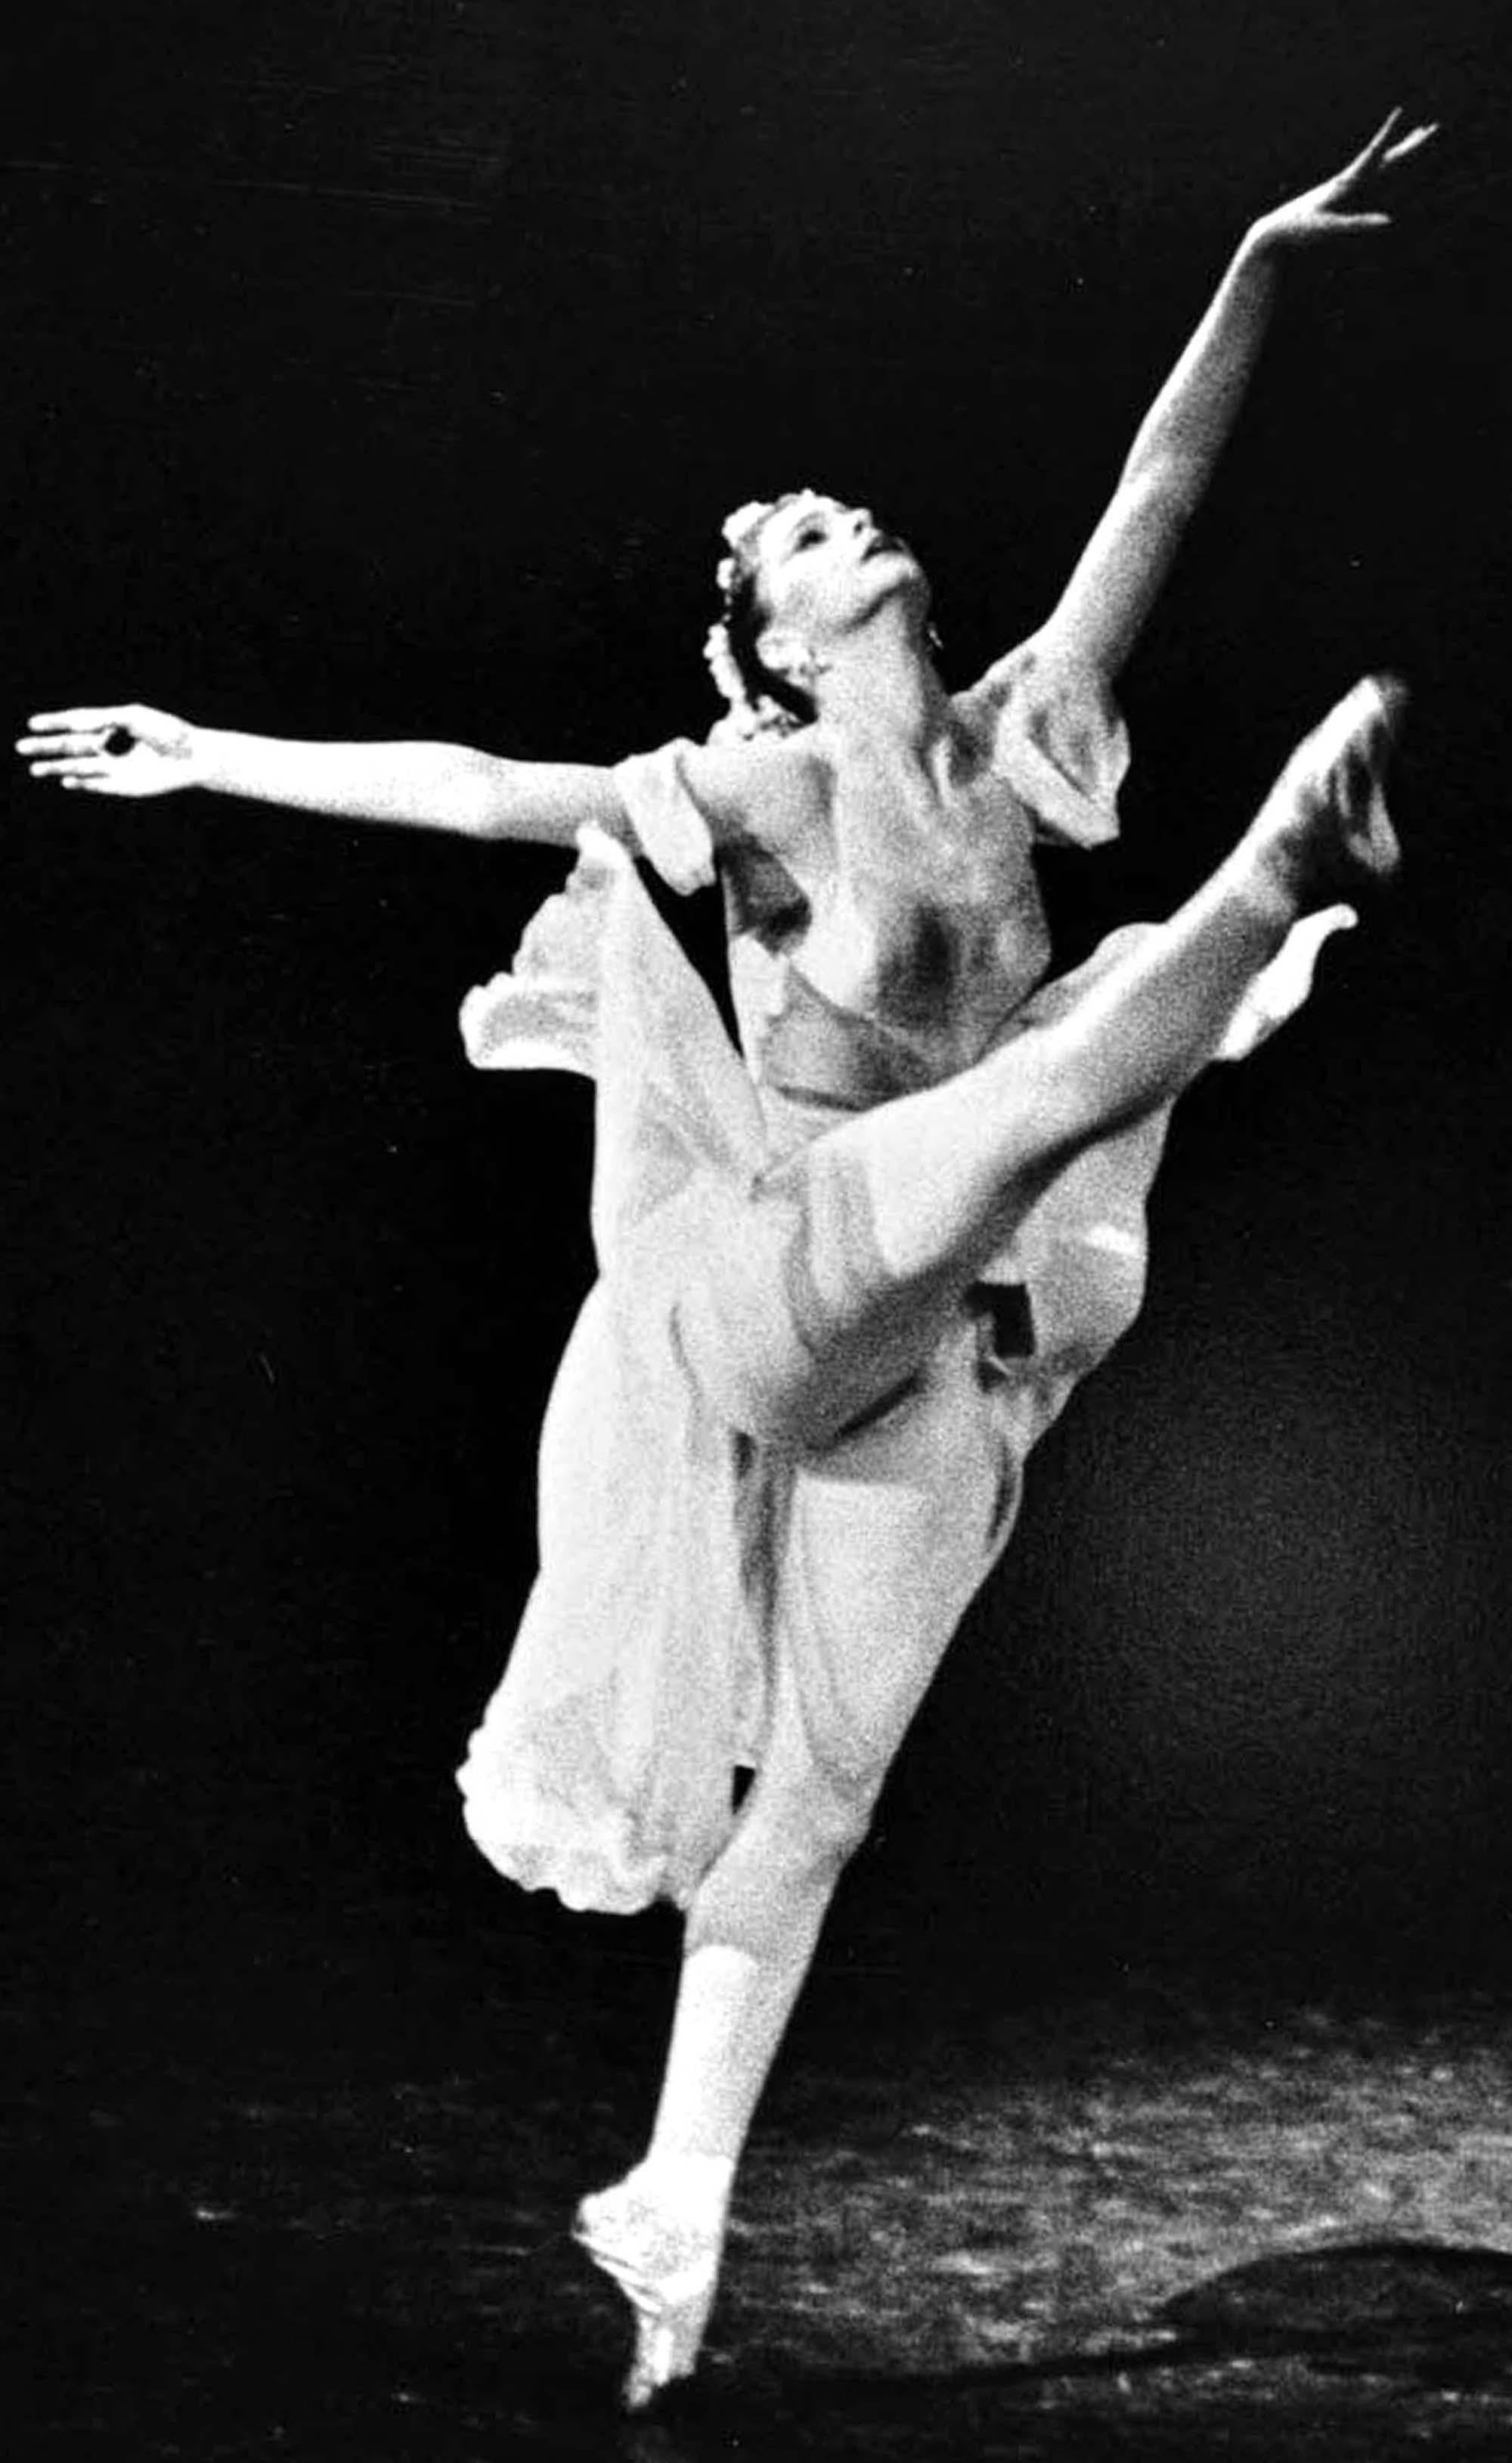 NYCB dancer Suzanne Farrell performing 'Don Quixote' - Photograph by Jack Mitchell